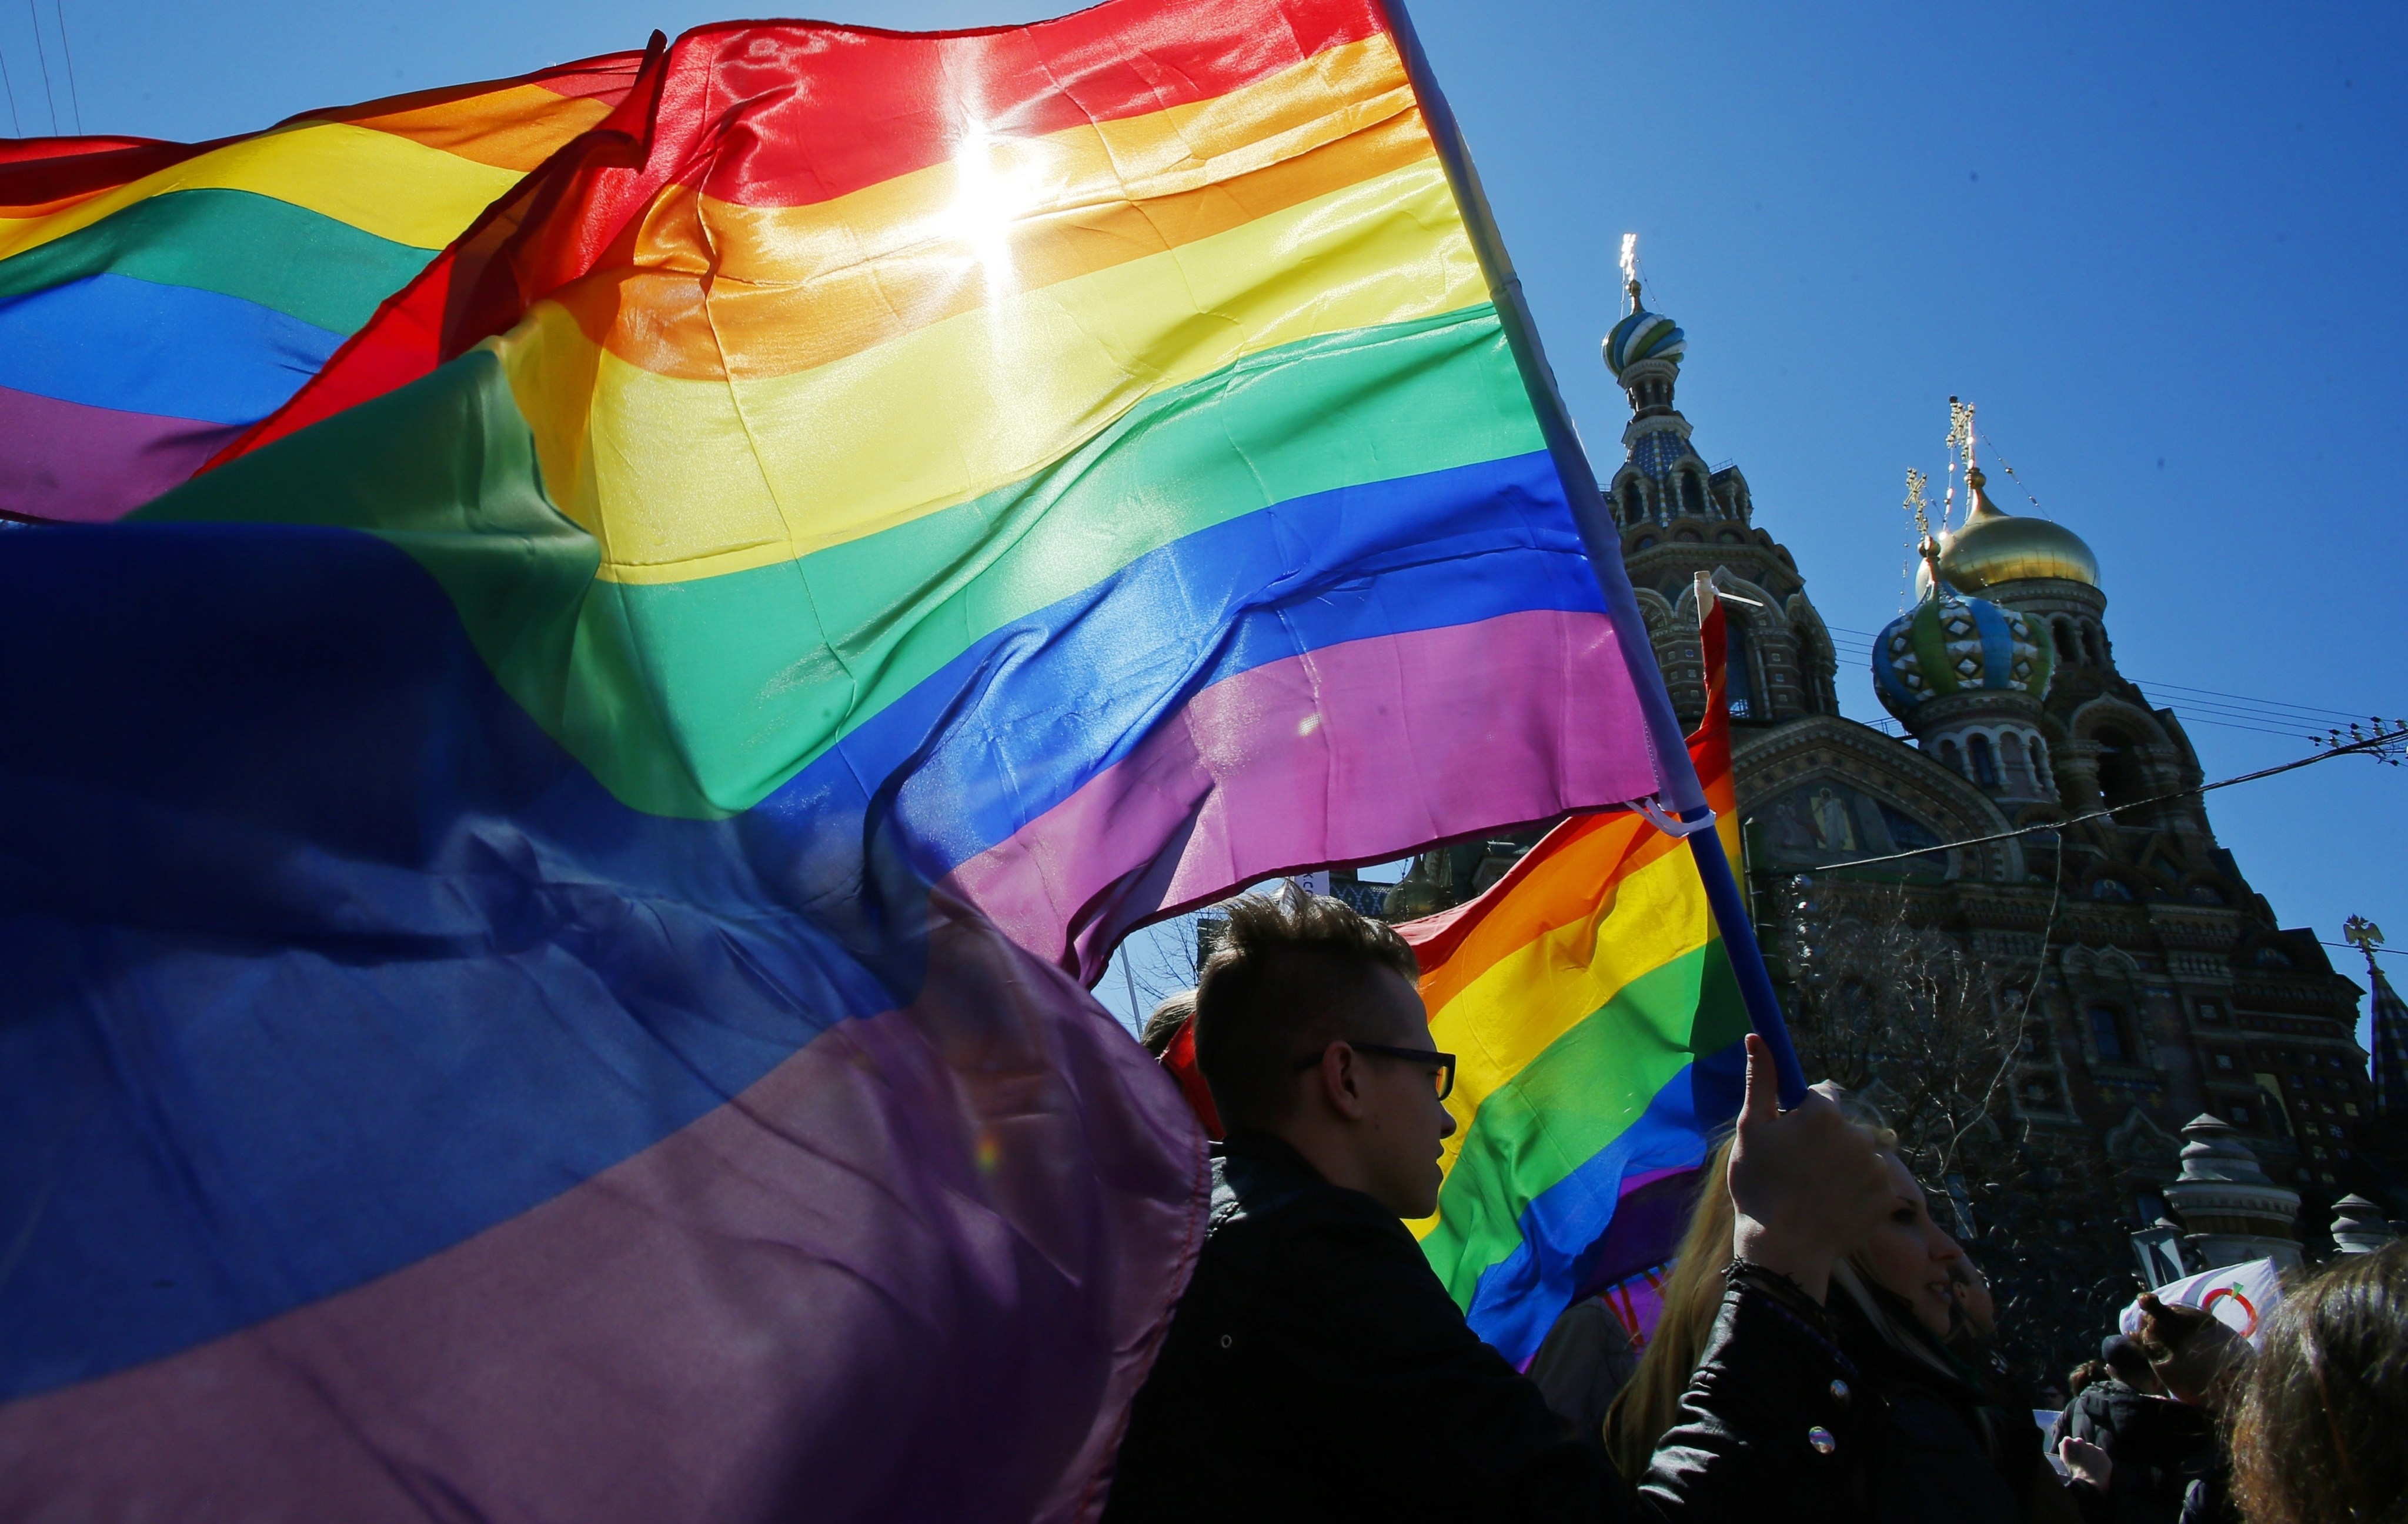 Gay rights activists carry rainbow flags as they march in St Petersburg, Russia in May 2013. Photo: AP